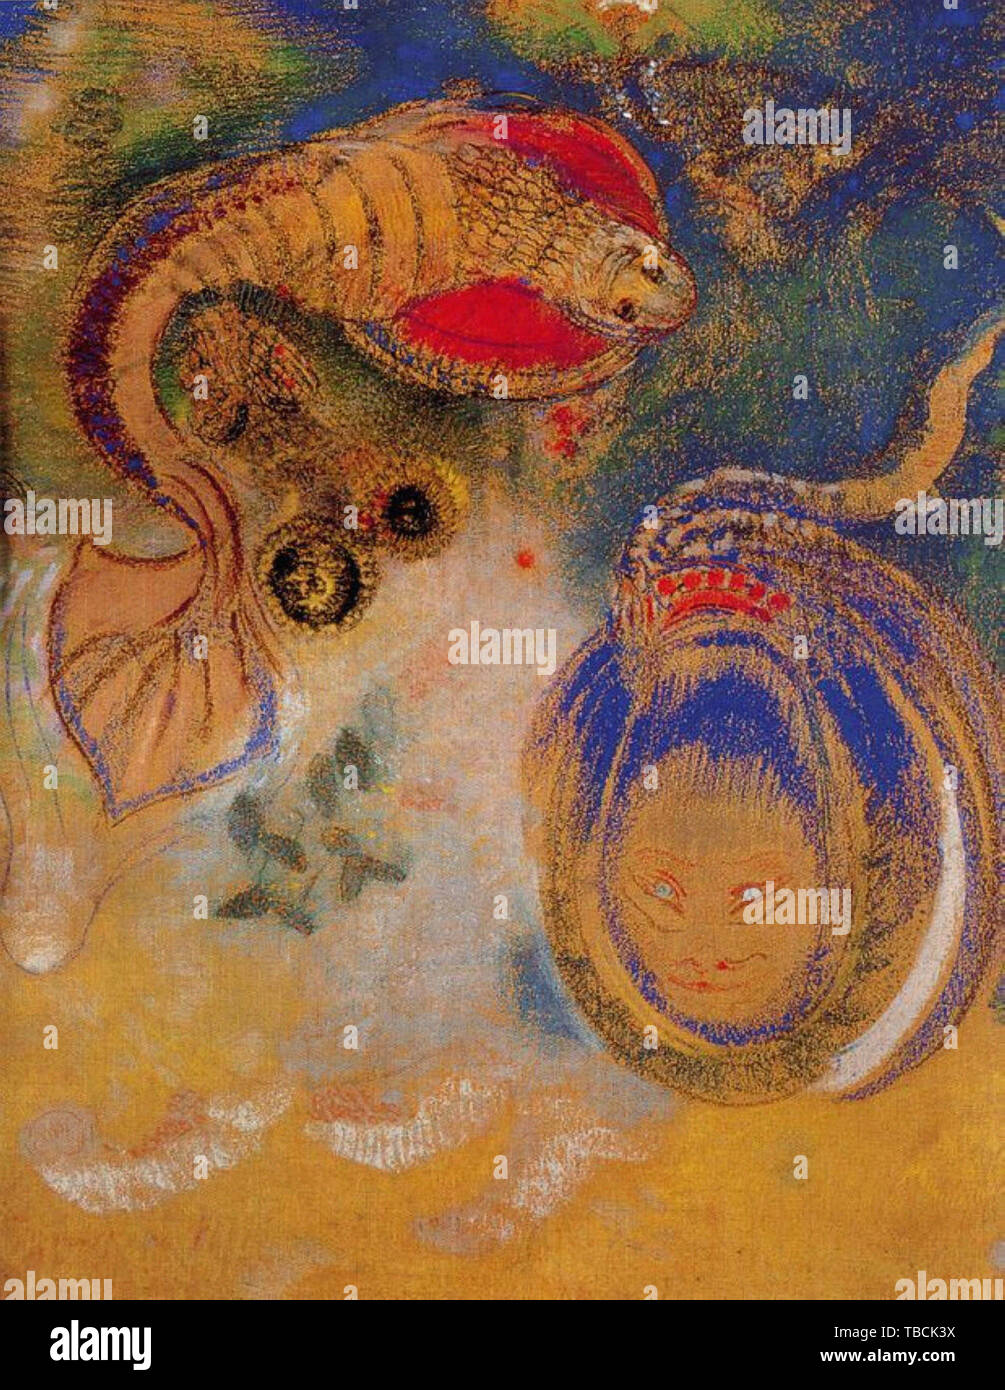 Odilon Redon - Animaux mer fond Banque D'Images